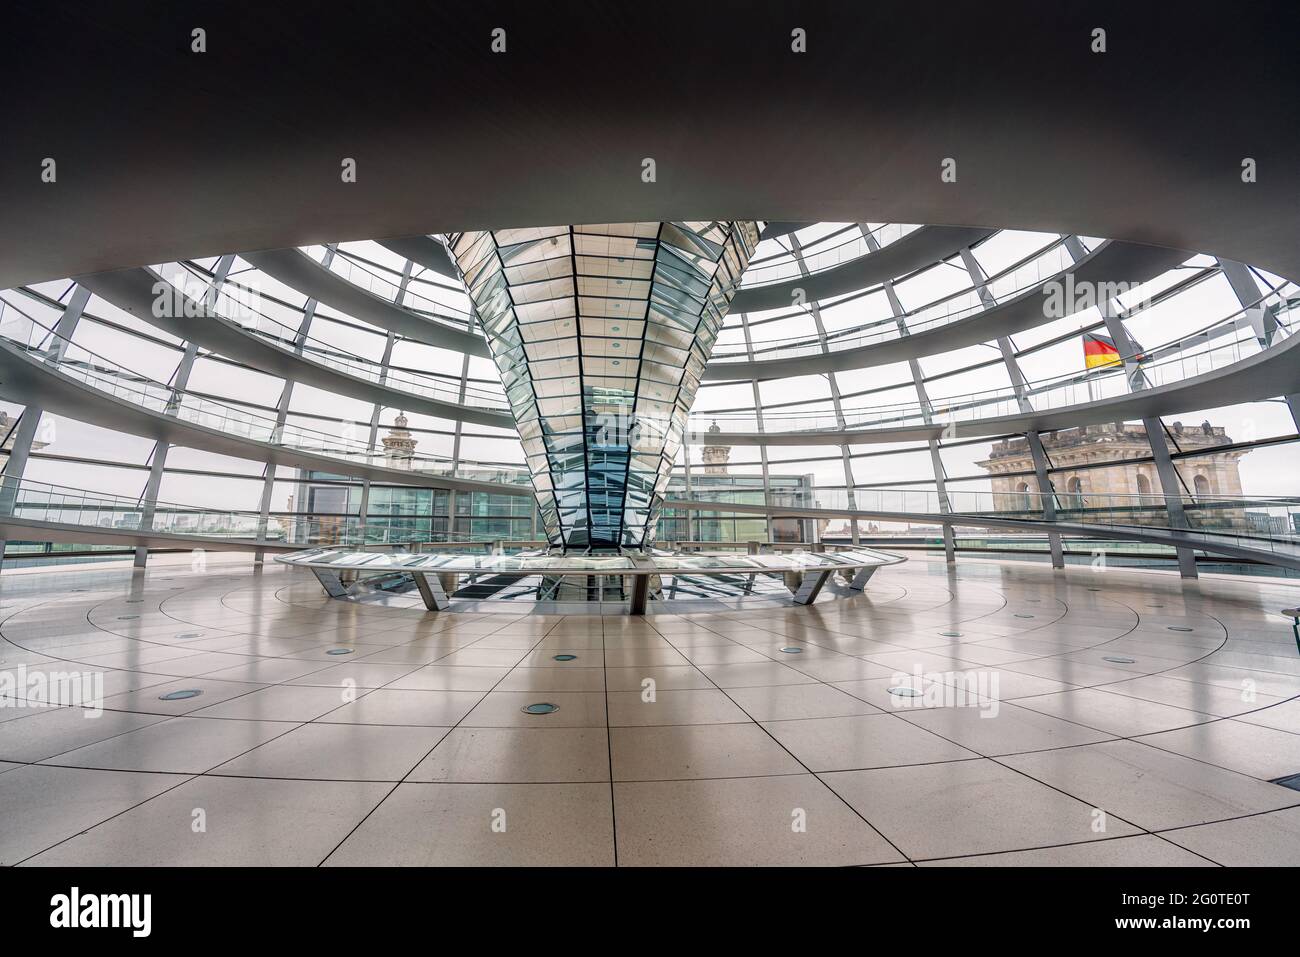 Interior of the Glass Dome of the German Parliament (Bundestag) - Reichstag Building - Berlin, Germany Stock Photo